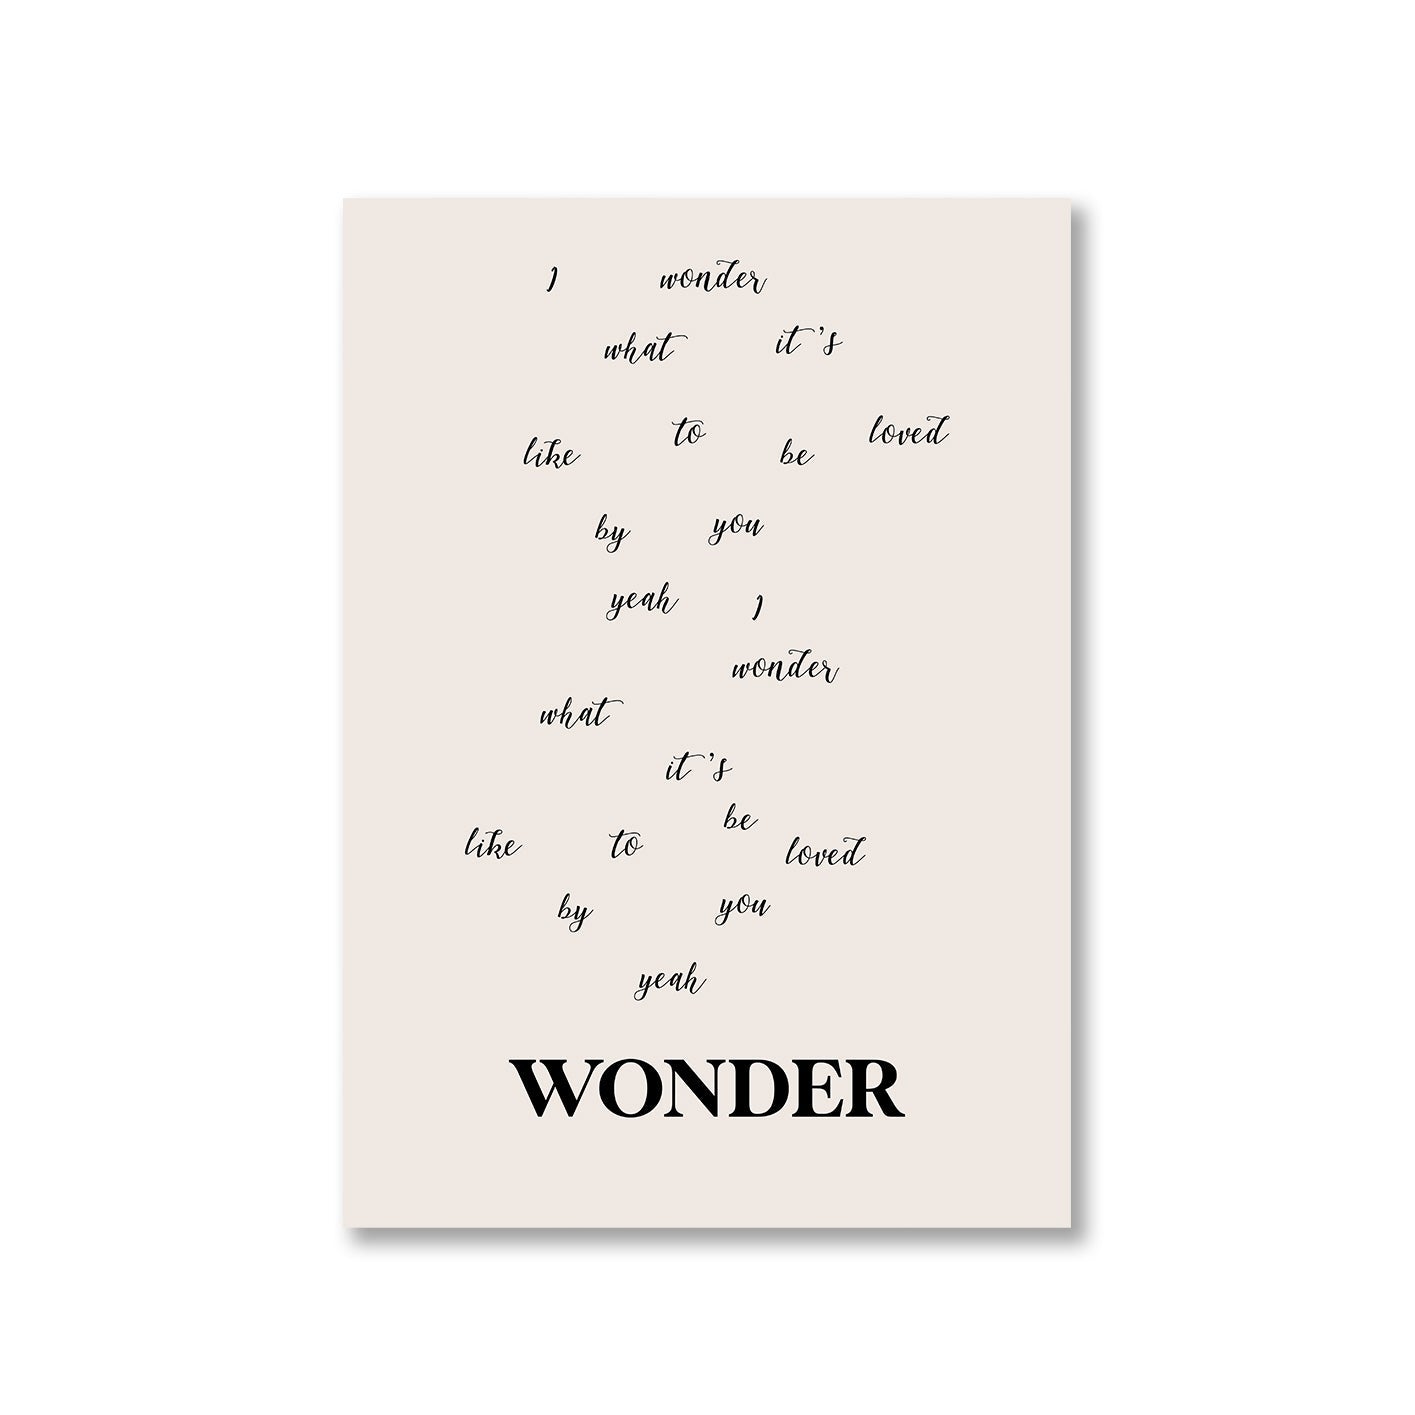 shawn mendes wonder poster wall art buy online united states of america usa the banyan tee tbt a4